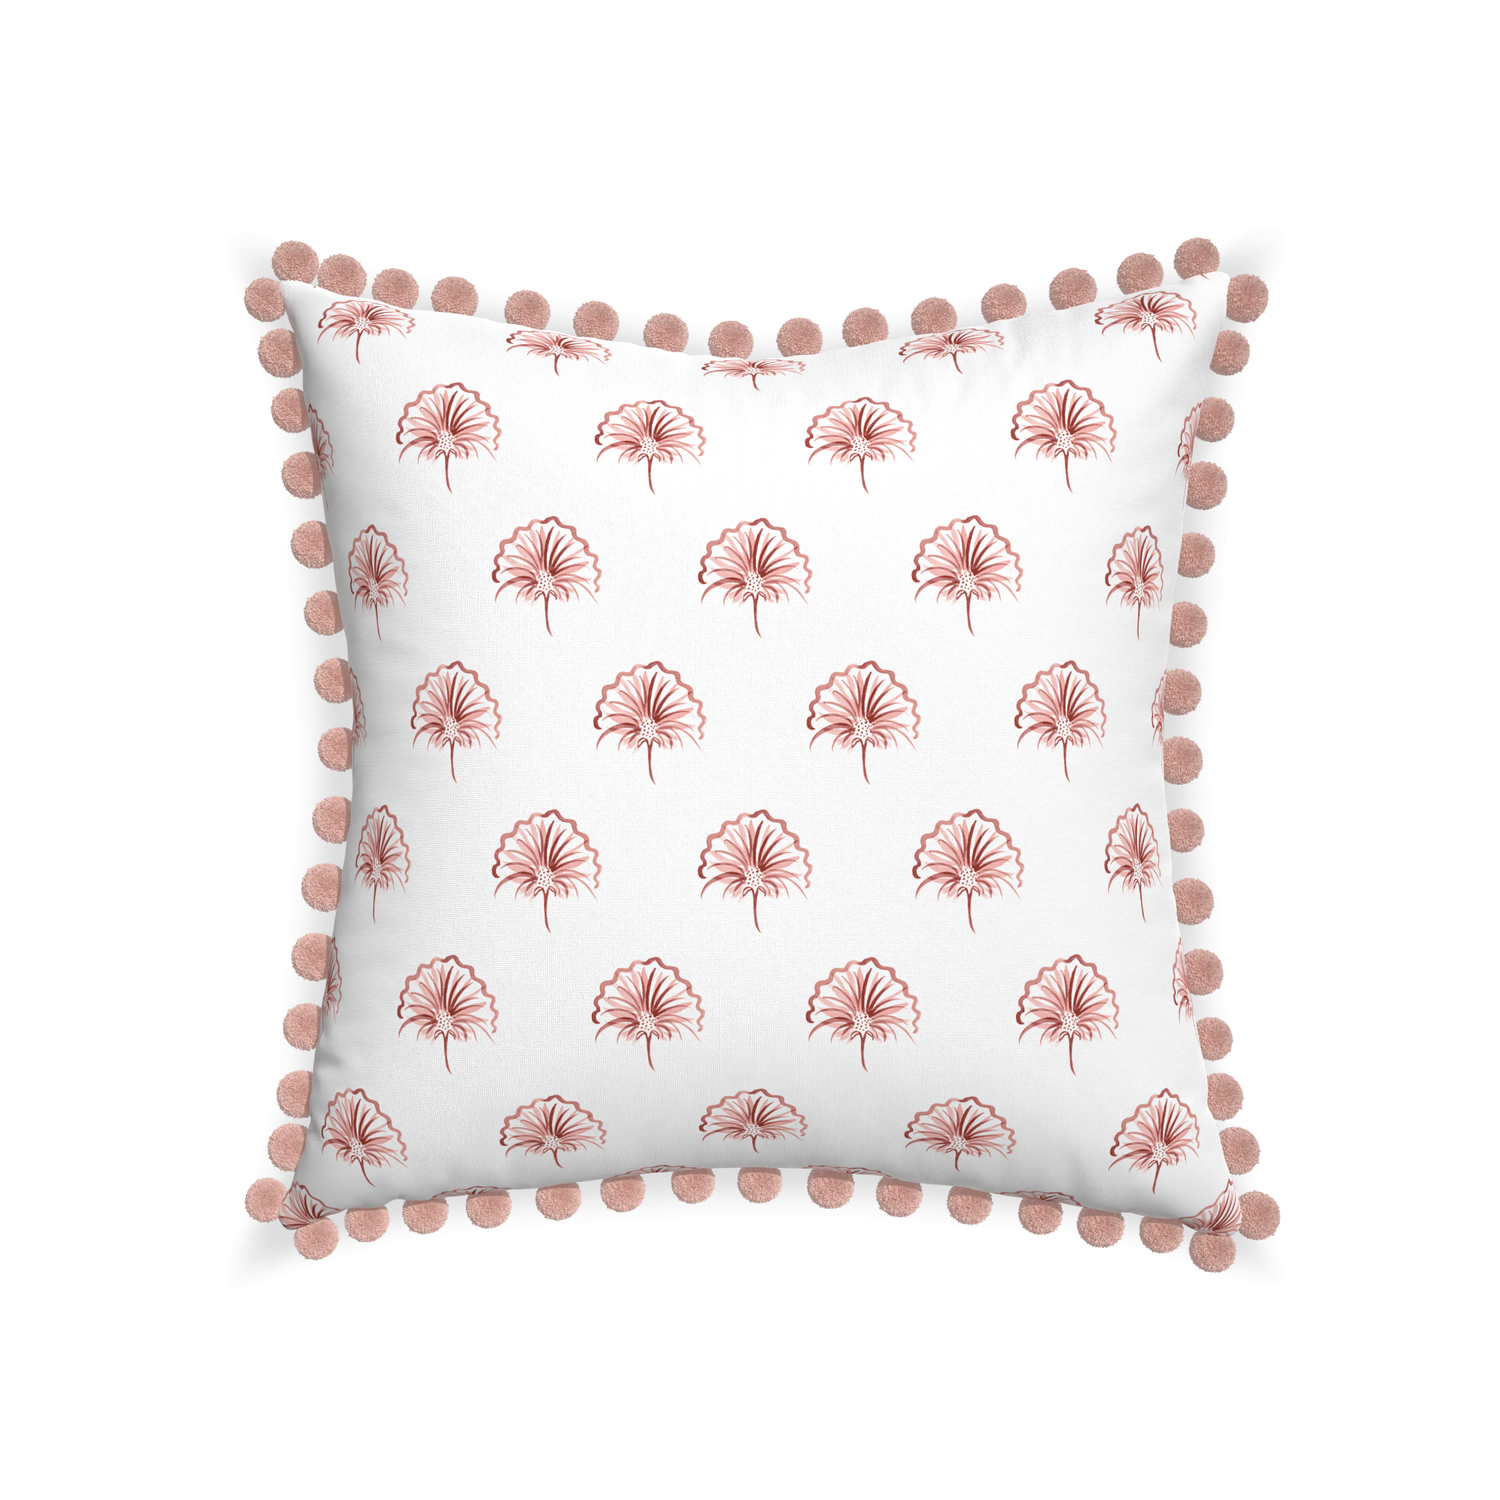 22-square penelope rose custom floral pinkpillow with rose pom pom on white background